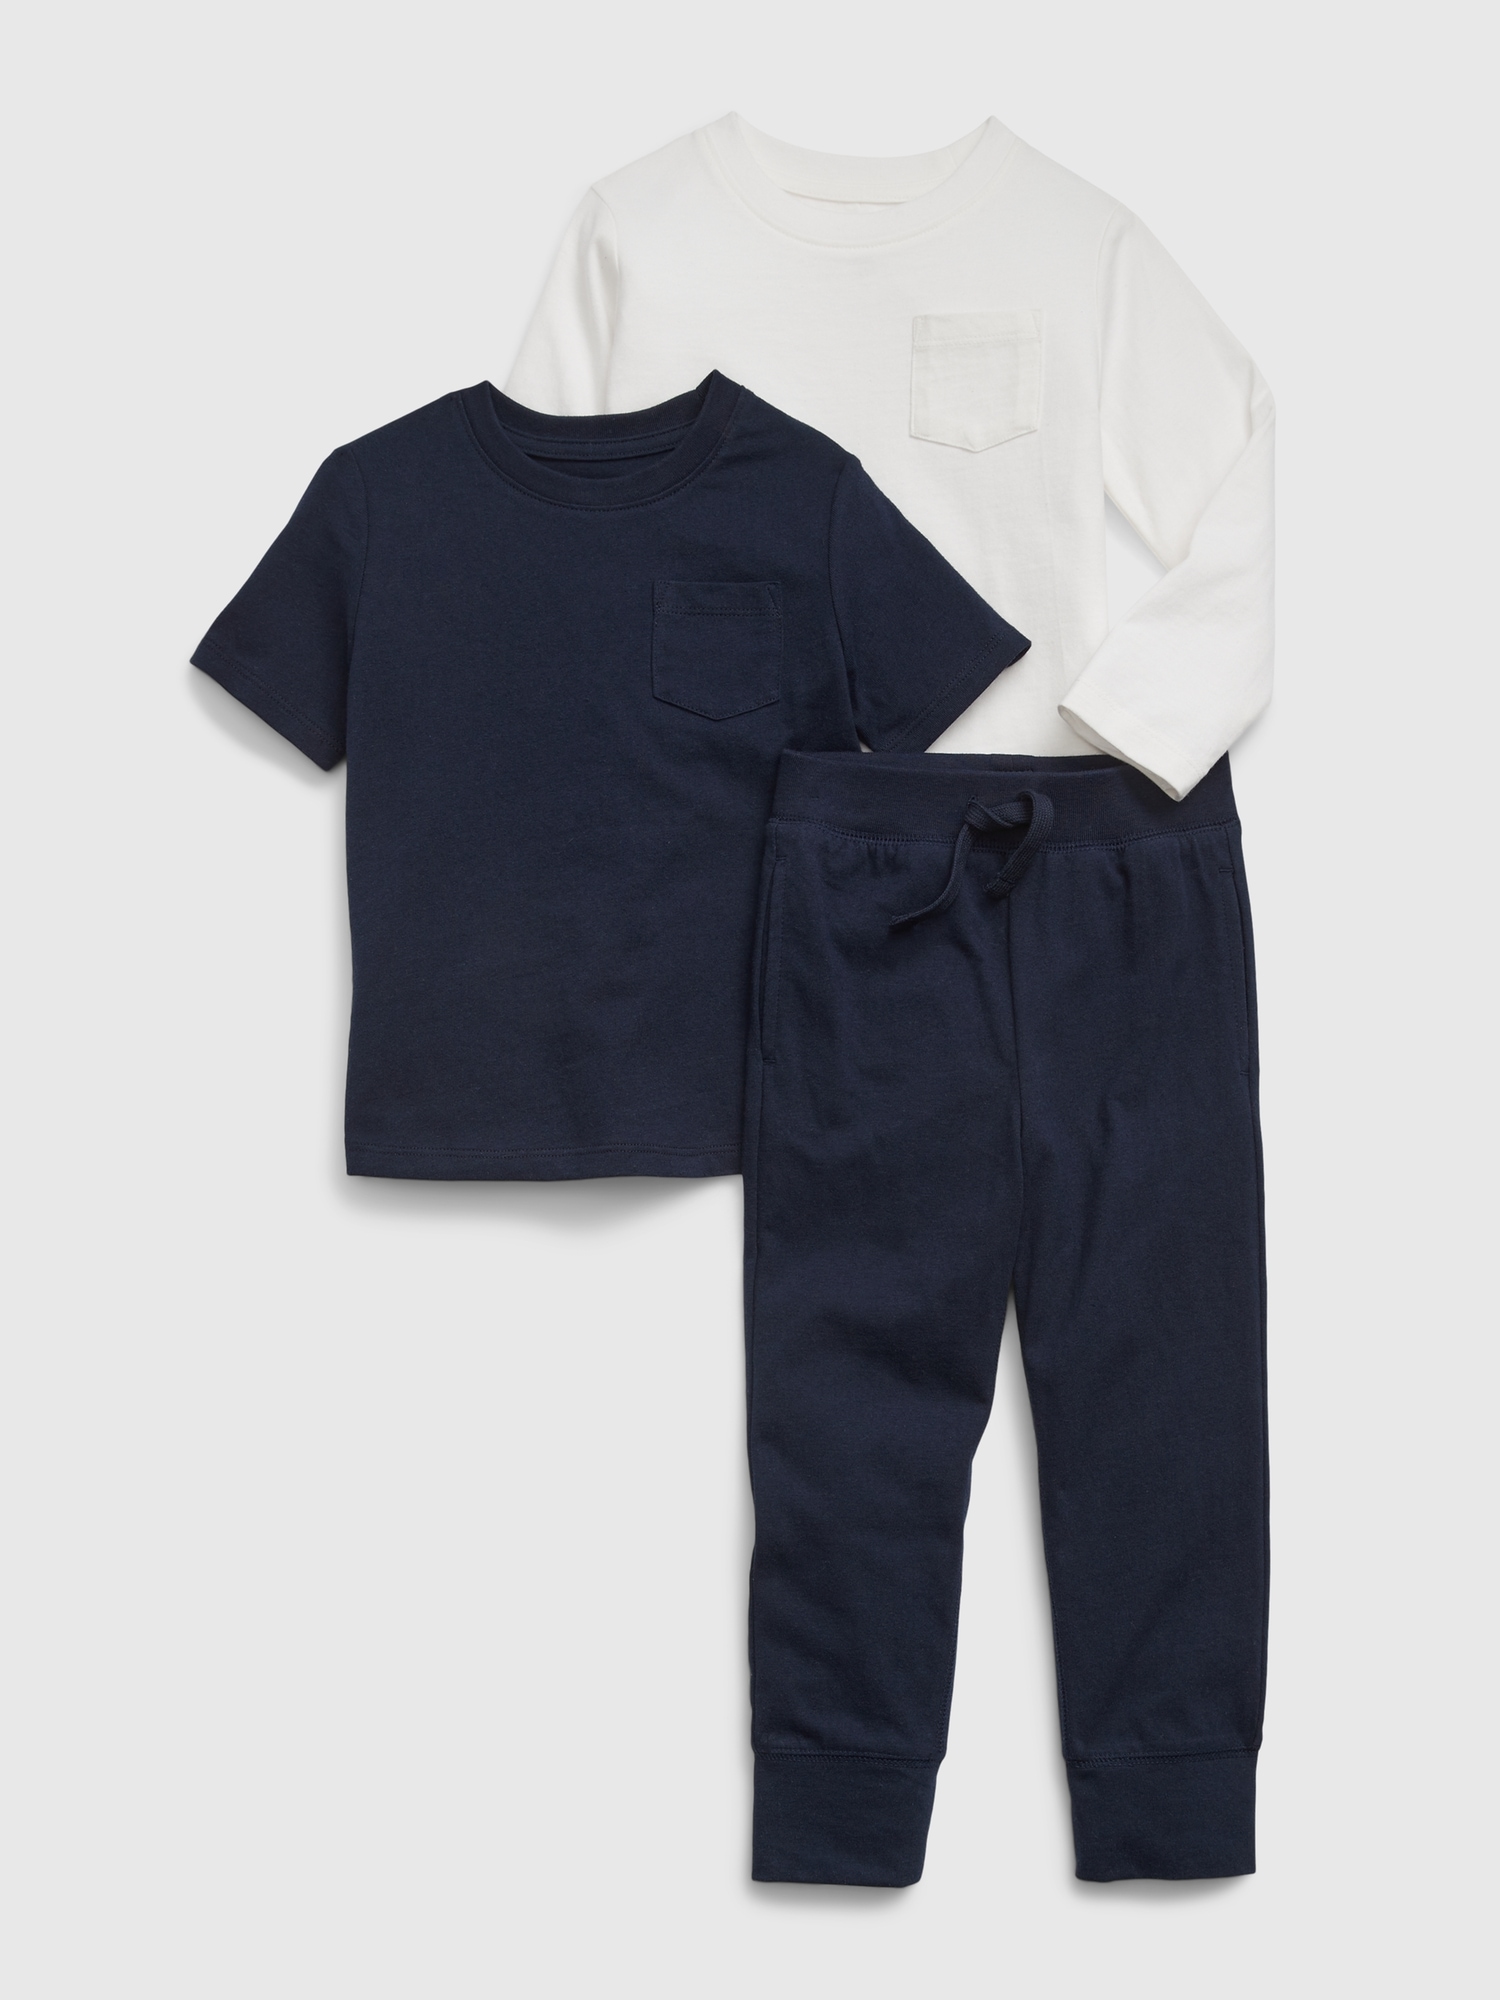 Gap Toddler Mix and Match Outfit Set blue. 1